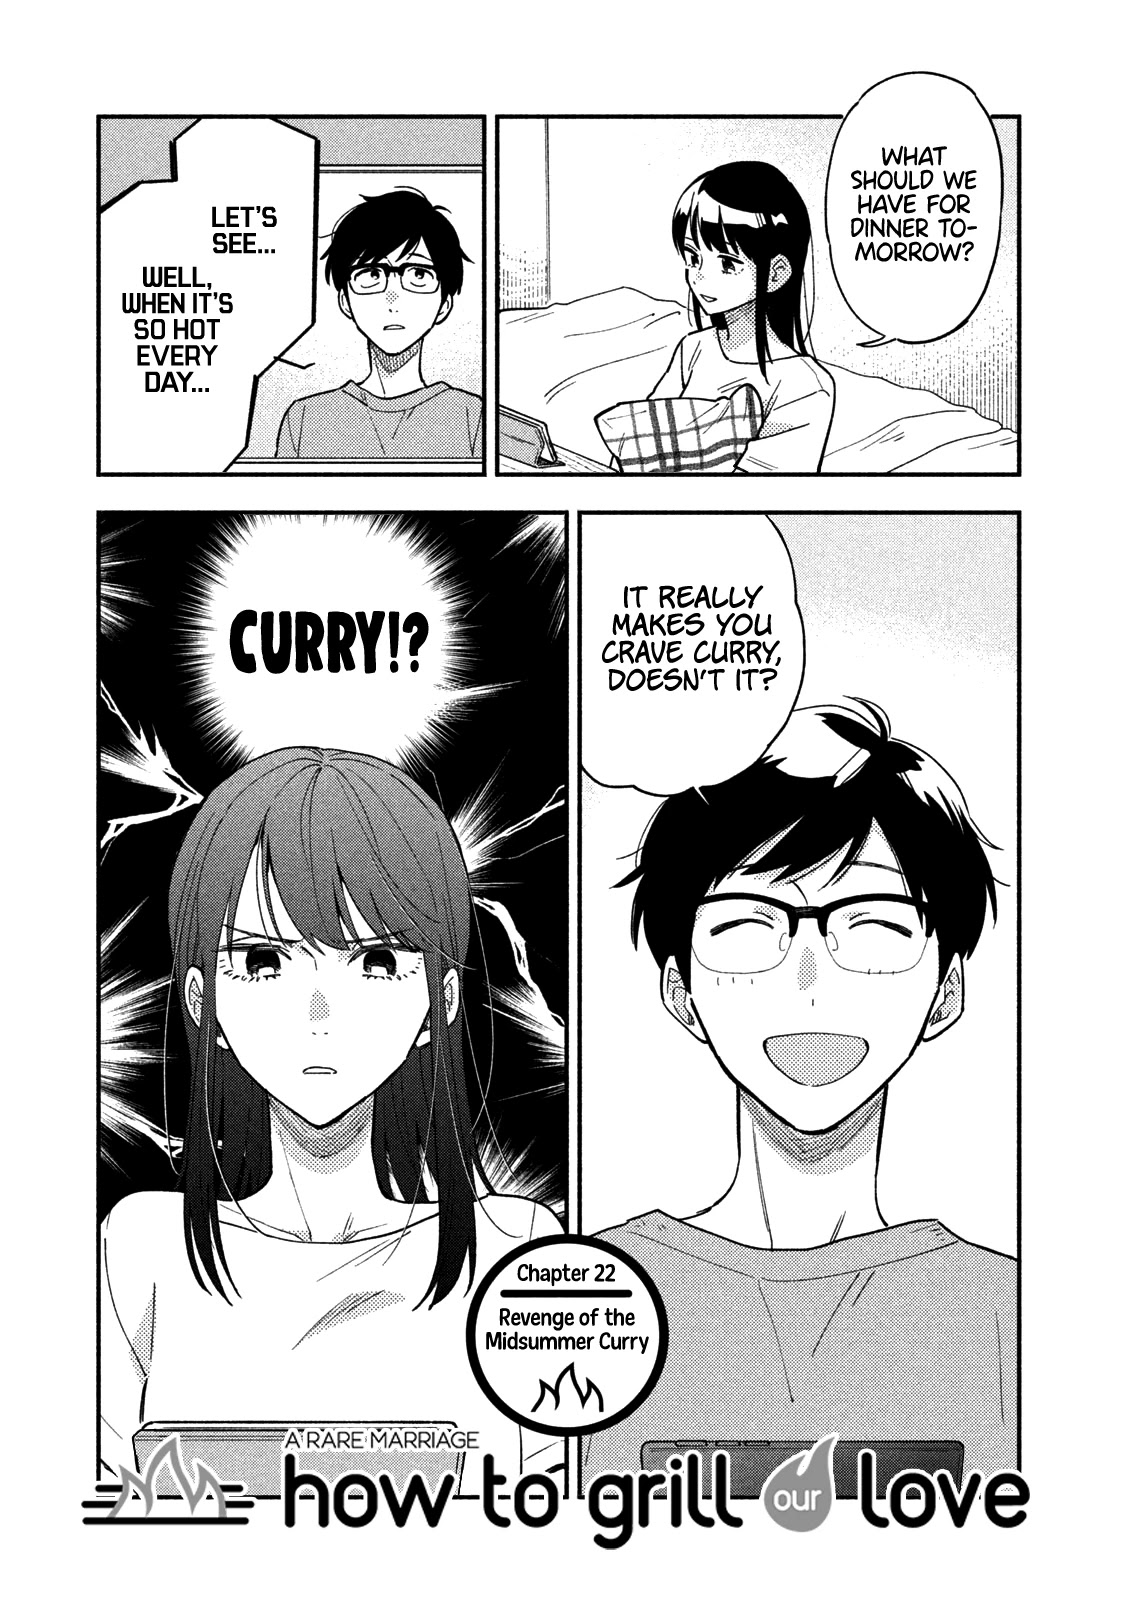 A Rare Marriage: How To Grill Our Love Chapter 22 #3